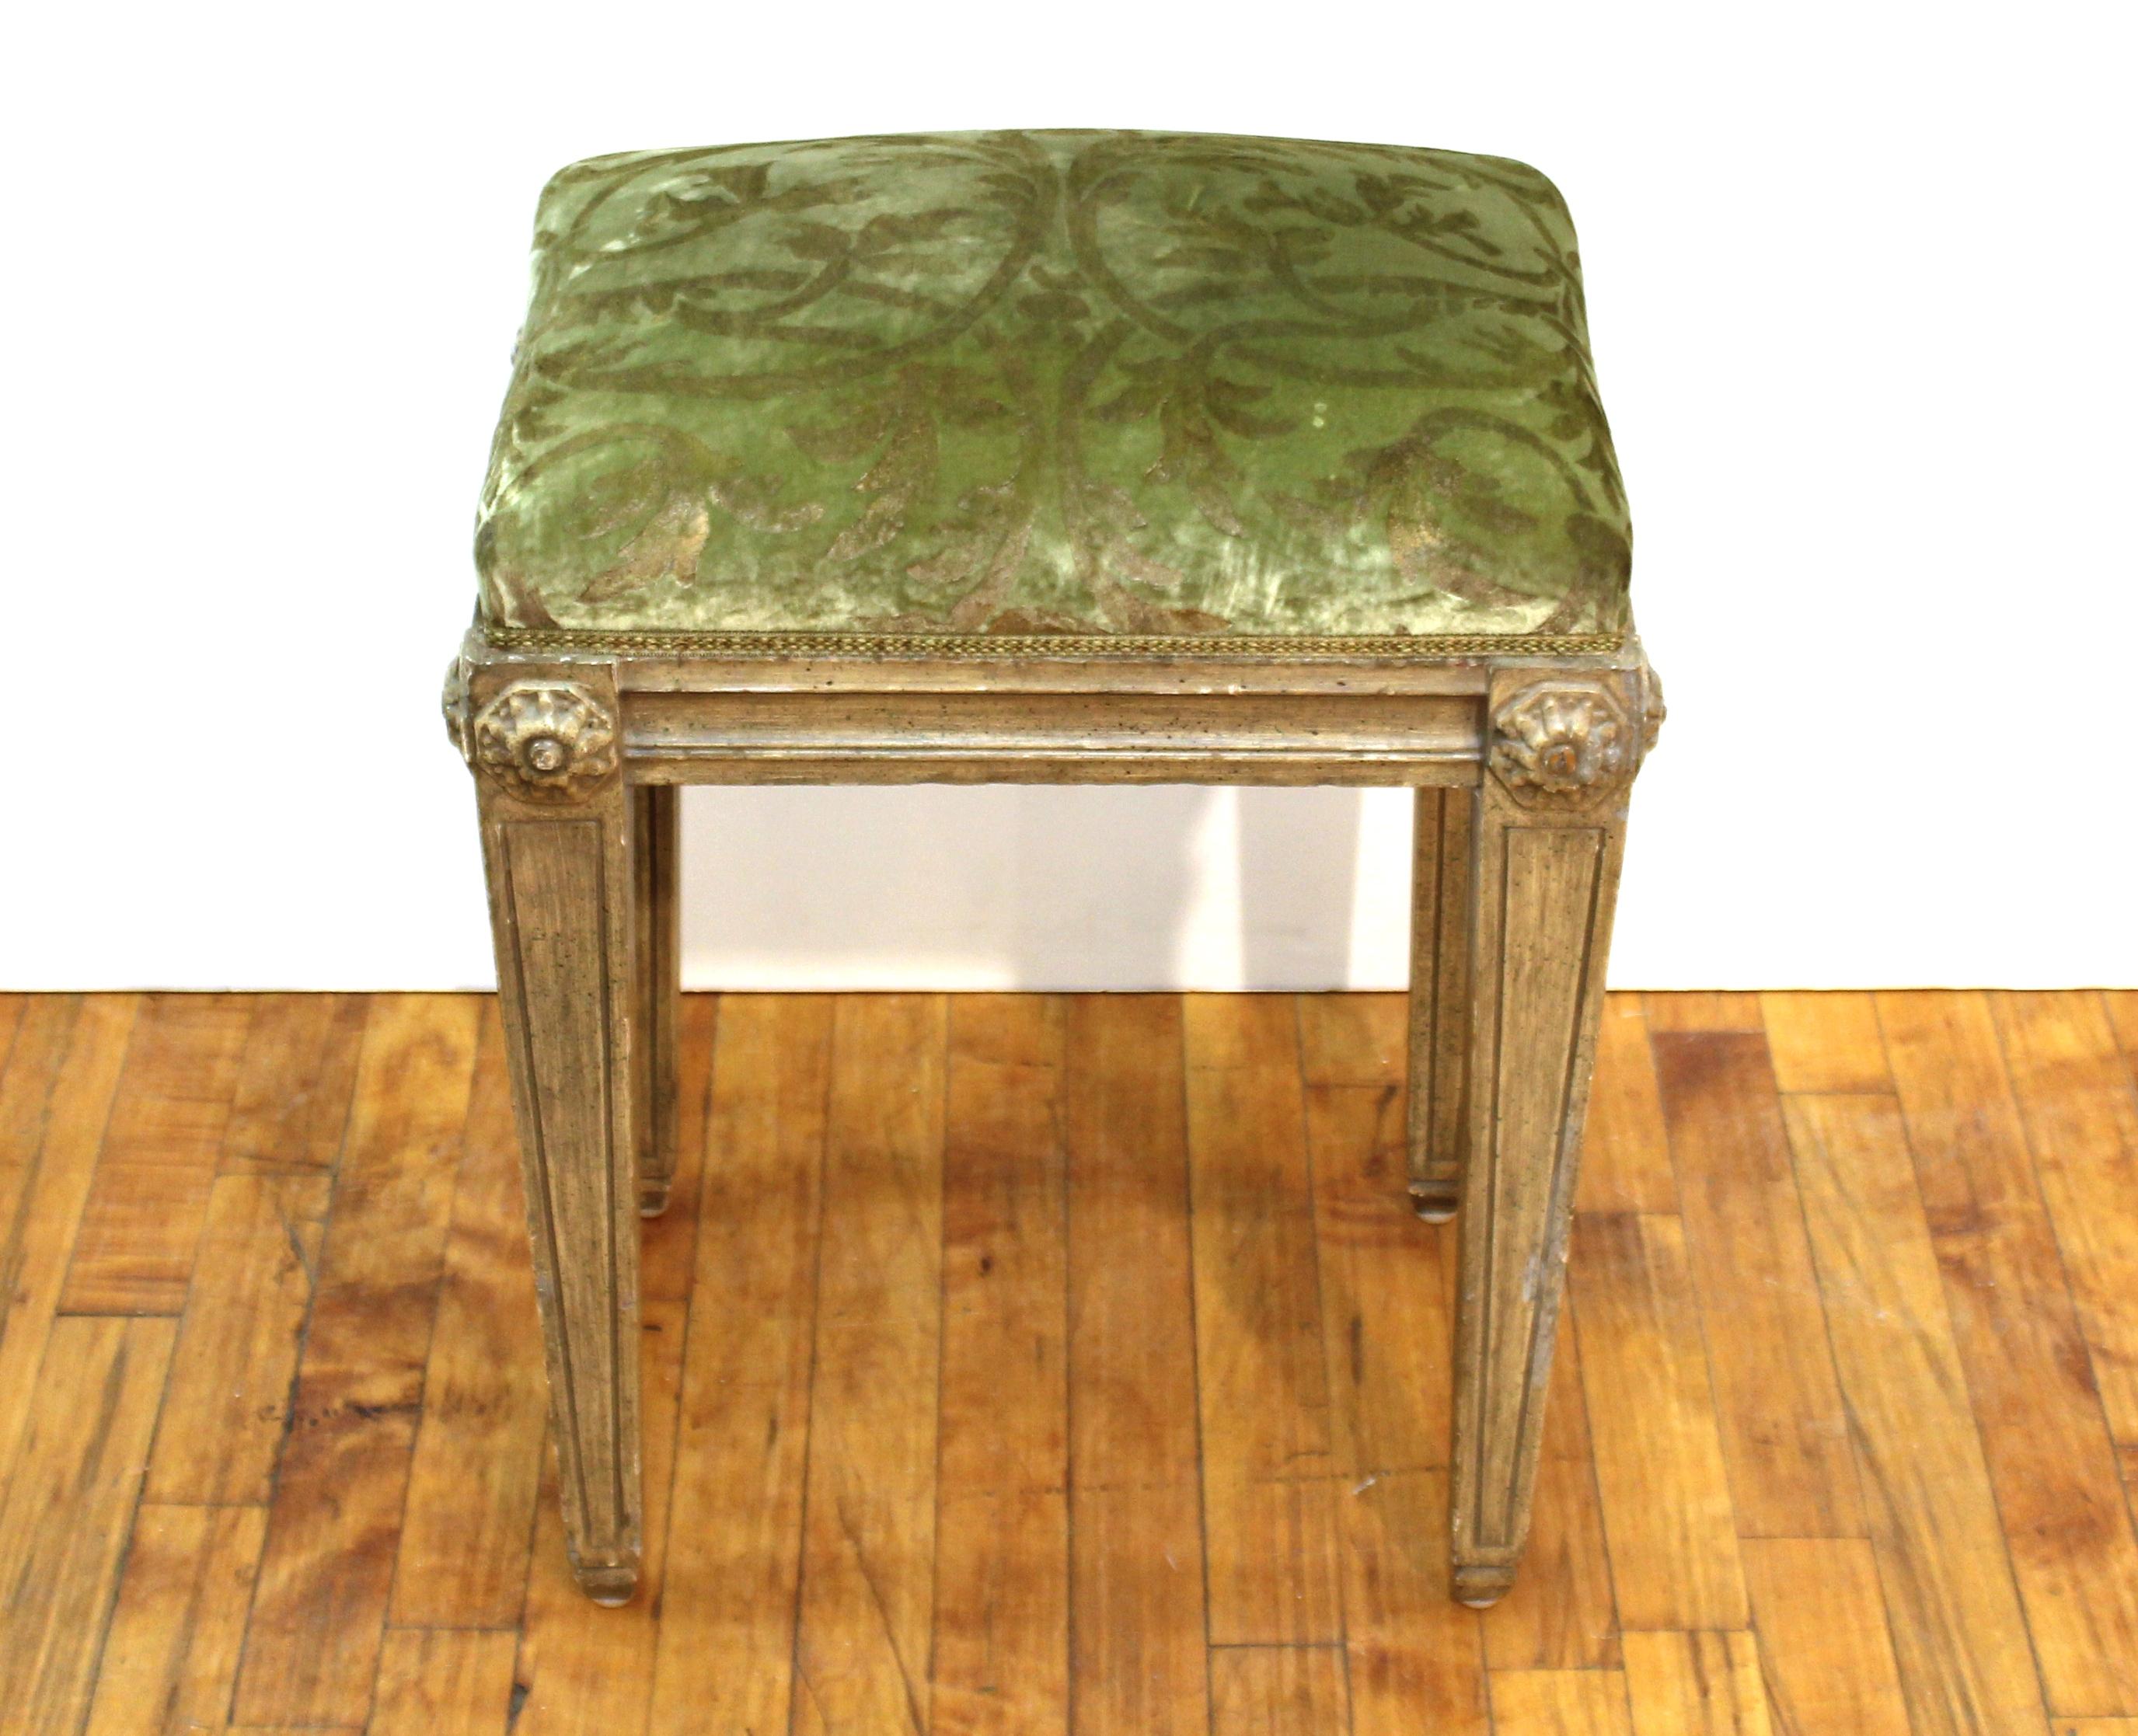 European Neoclassical Revival Style Wood Benches